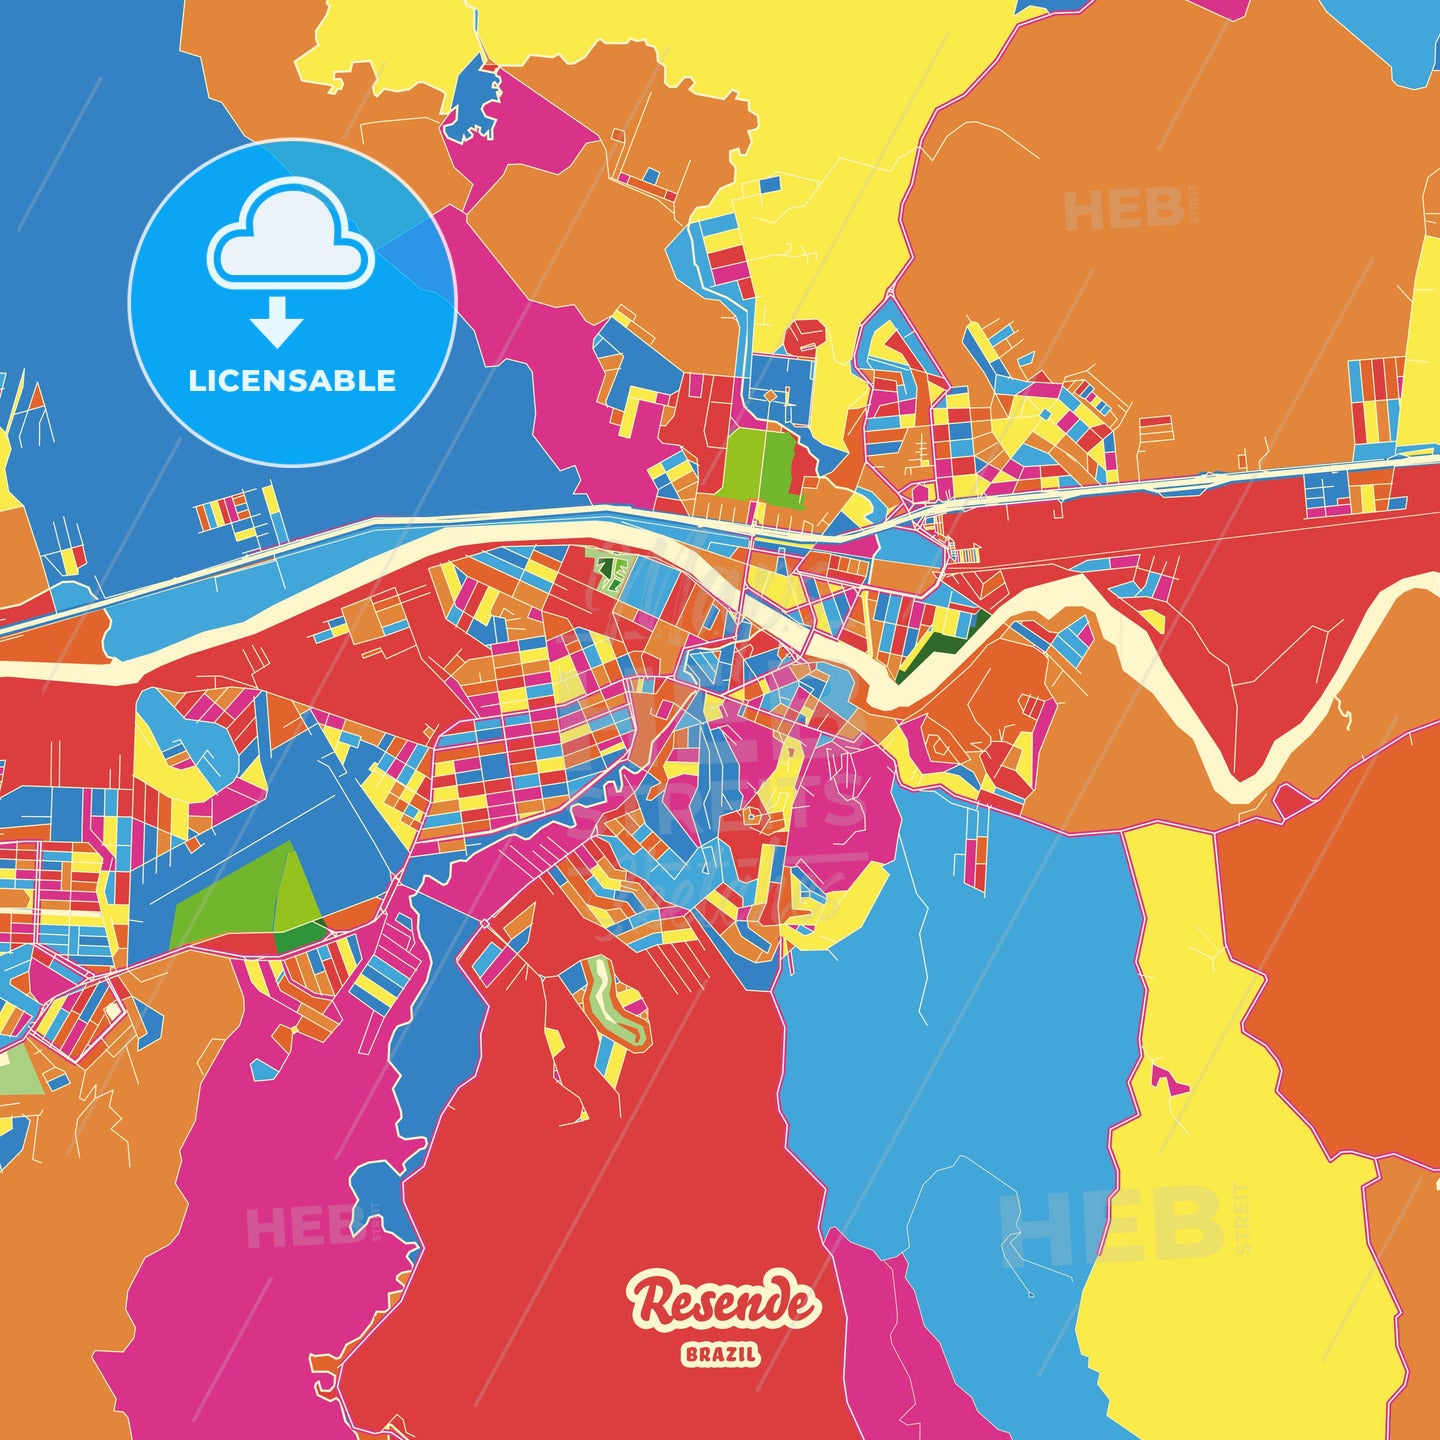 Resende, Brazil Crazy Colorful Street Map Poster Template - HEBSTREITS Sketches